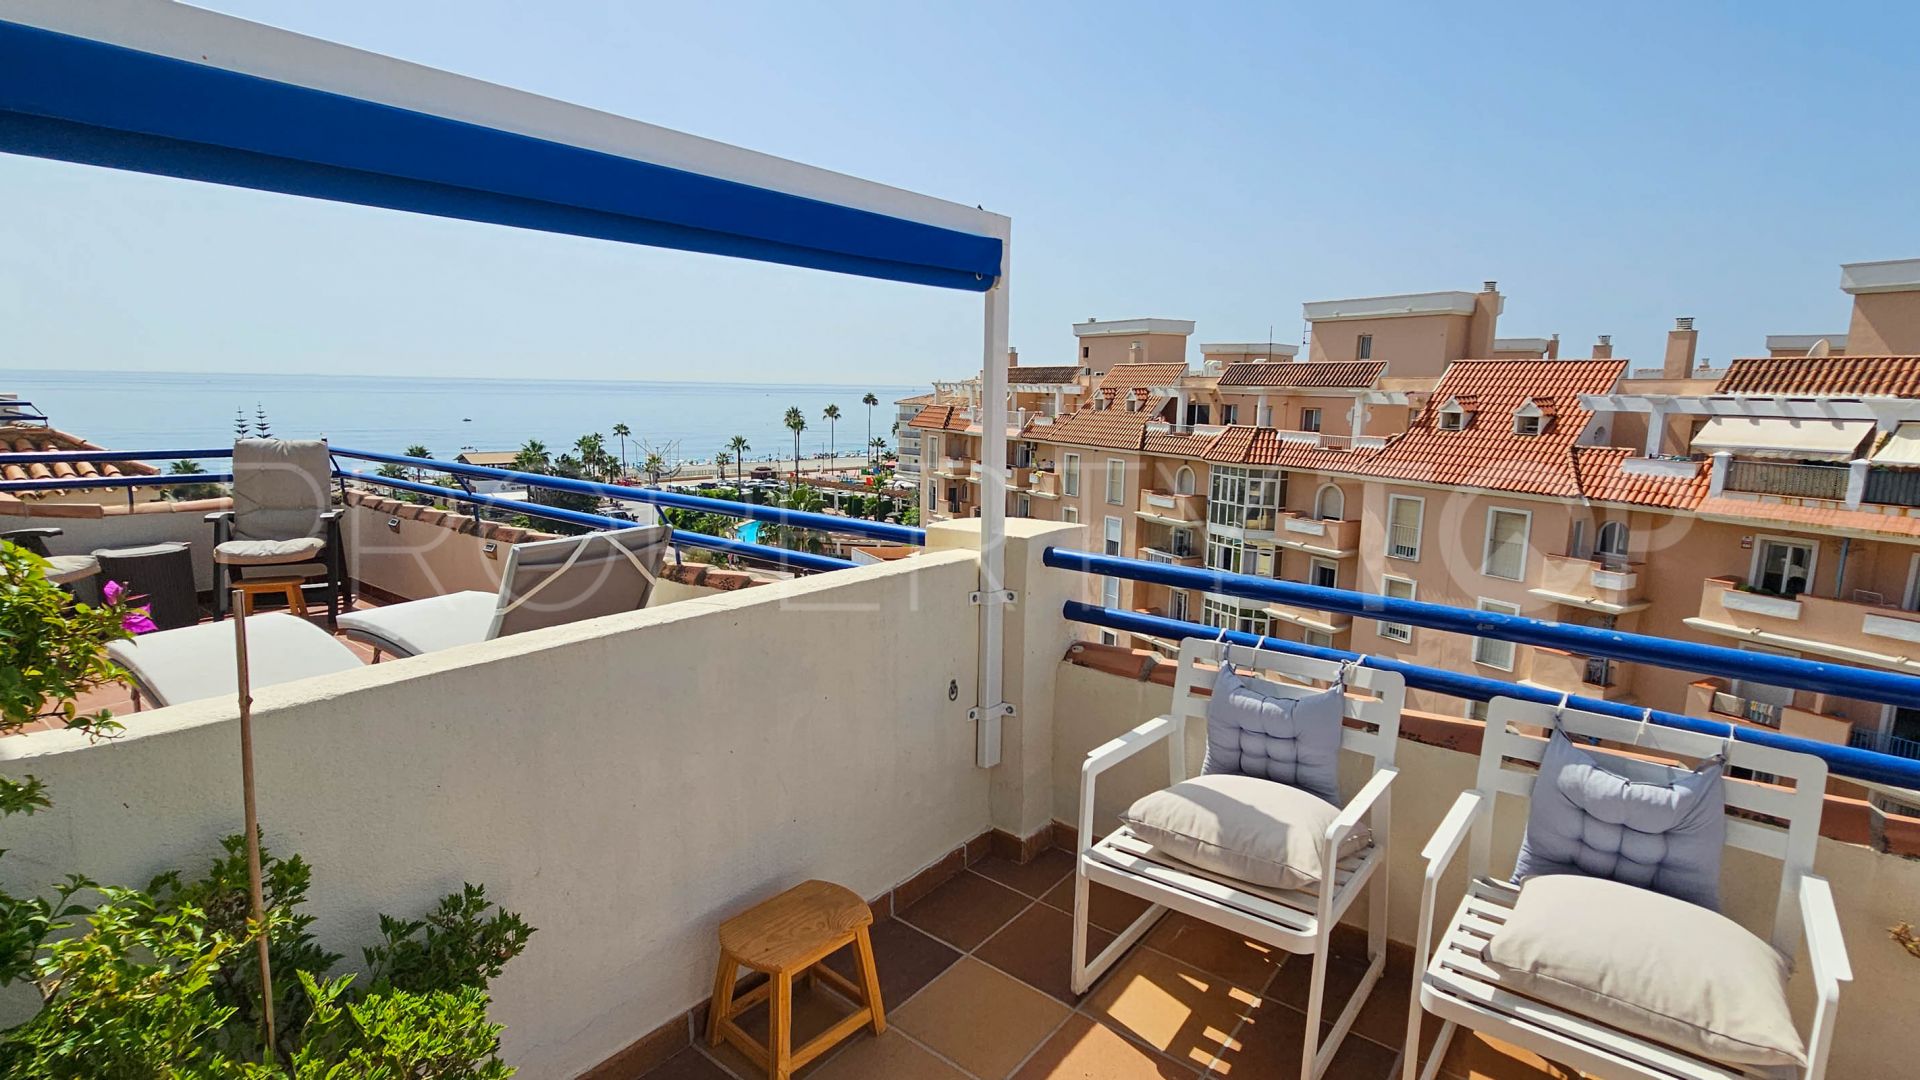 Penthouse for sale in Sabinillas with 1 bedroom